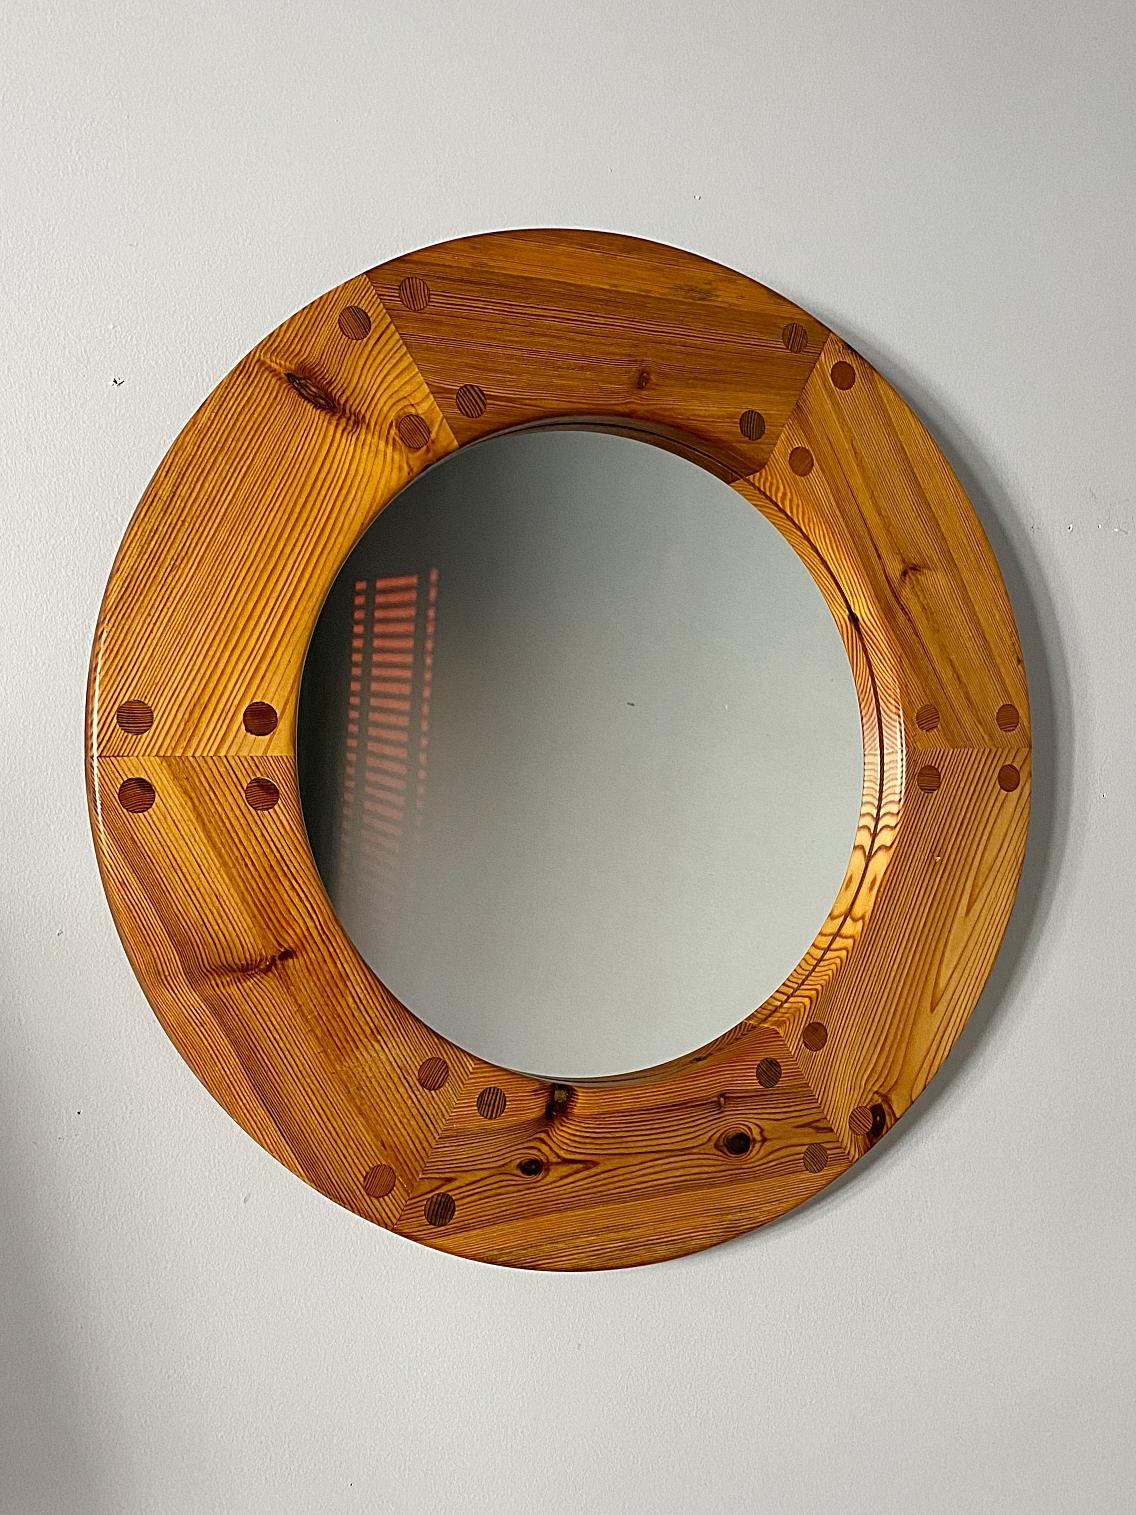 Beautiful round vintage mirror with solid pine wood frame by Uno & Östen Kristiansson for Luxus Vittsjö Möbelfabrik from the 1960s, Sweden. Massive frame around with decorative integrated wooden nails. The mirror is in very good condition.
We love